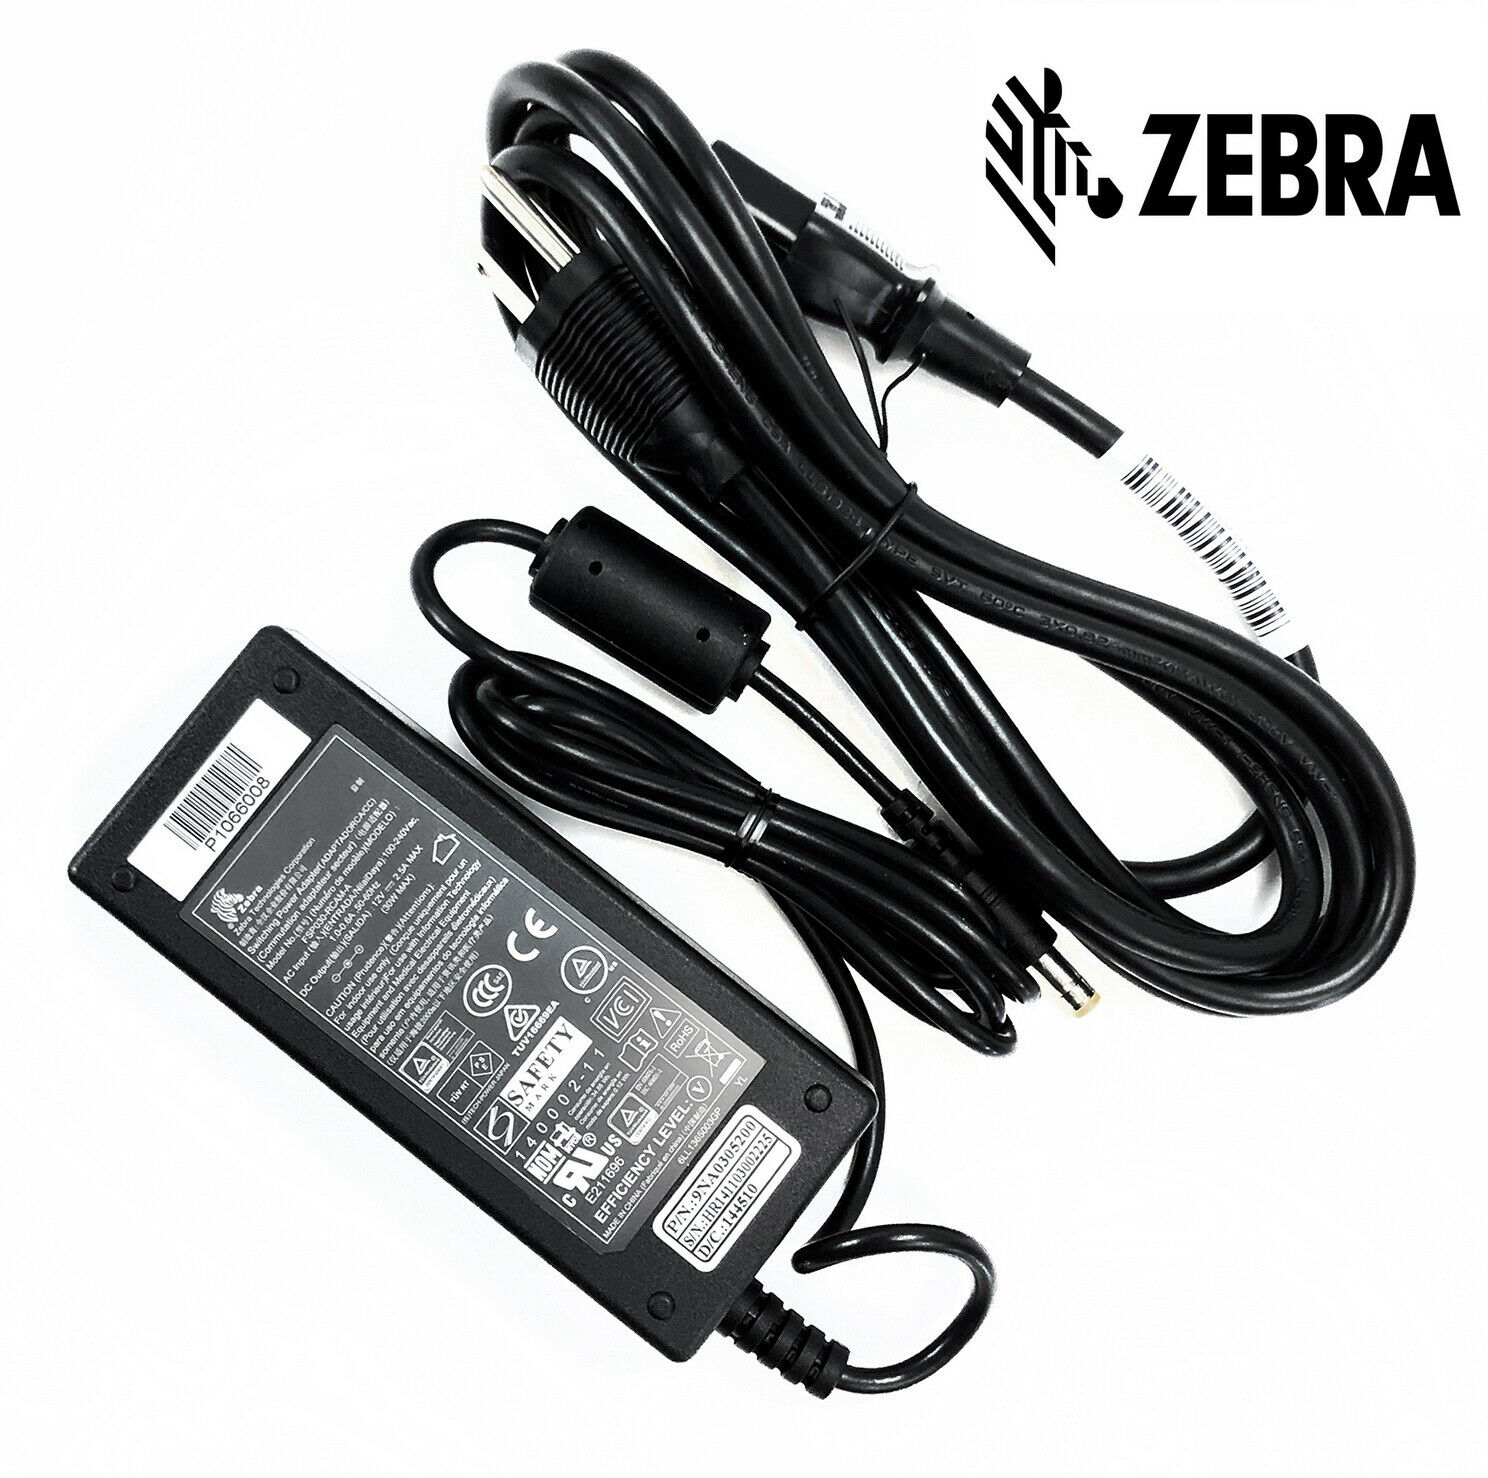 NEW OEM Zebra Healthcare AC Adapter Charger for ZQ510 ZQ520 Printers W/P.Cord Country/Region of Manufacture: Japan Com - Click Image to Close